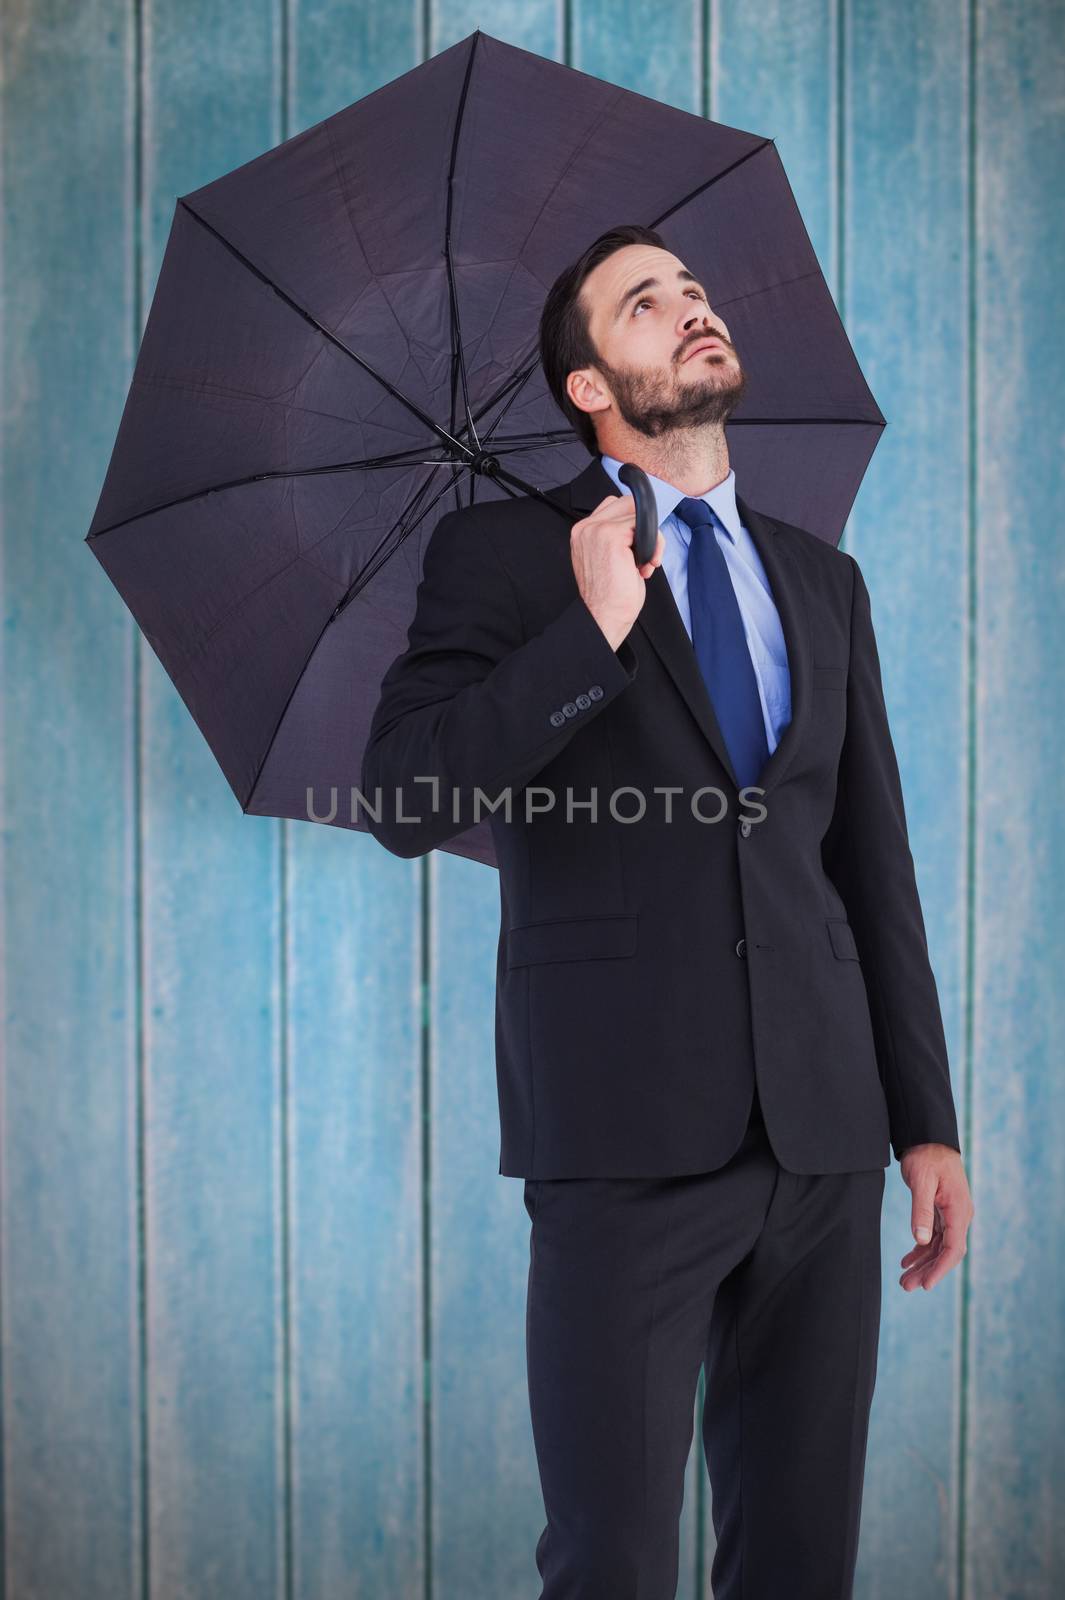 Businesswoman in suit holding umbrella while looking up against wooden planks